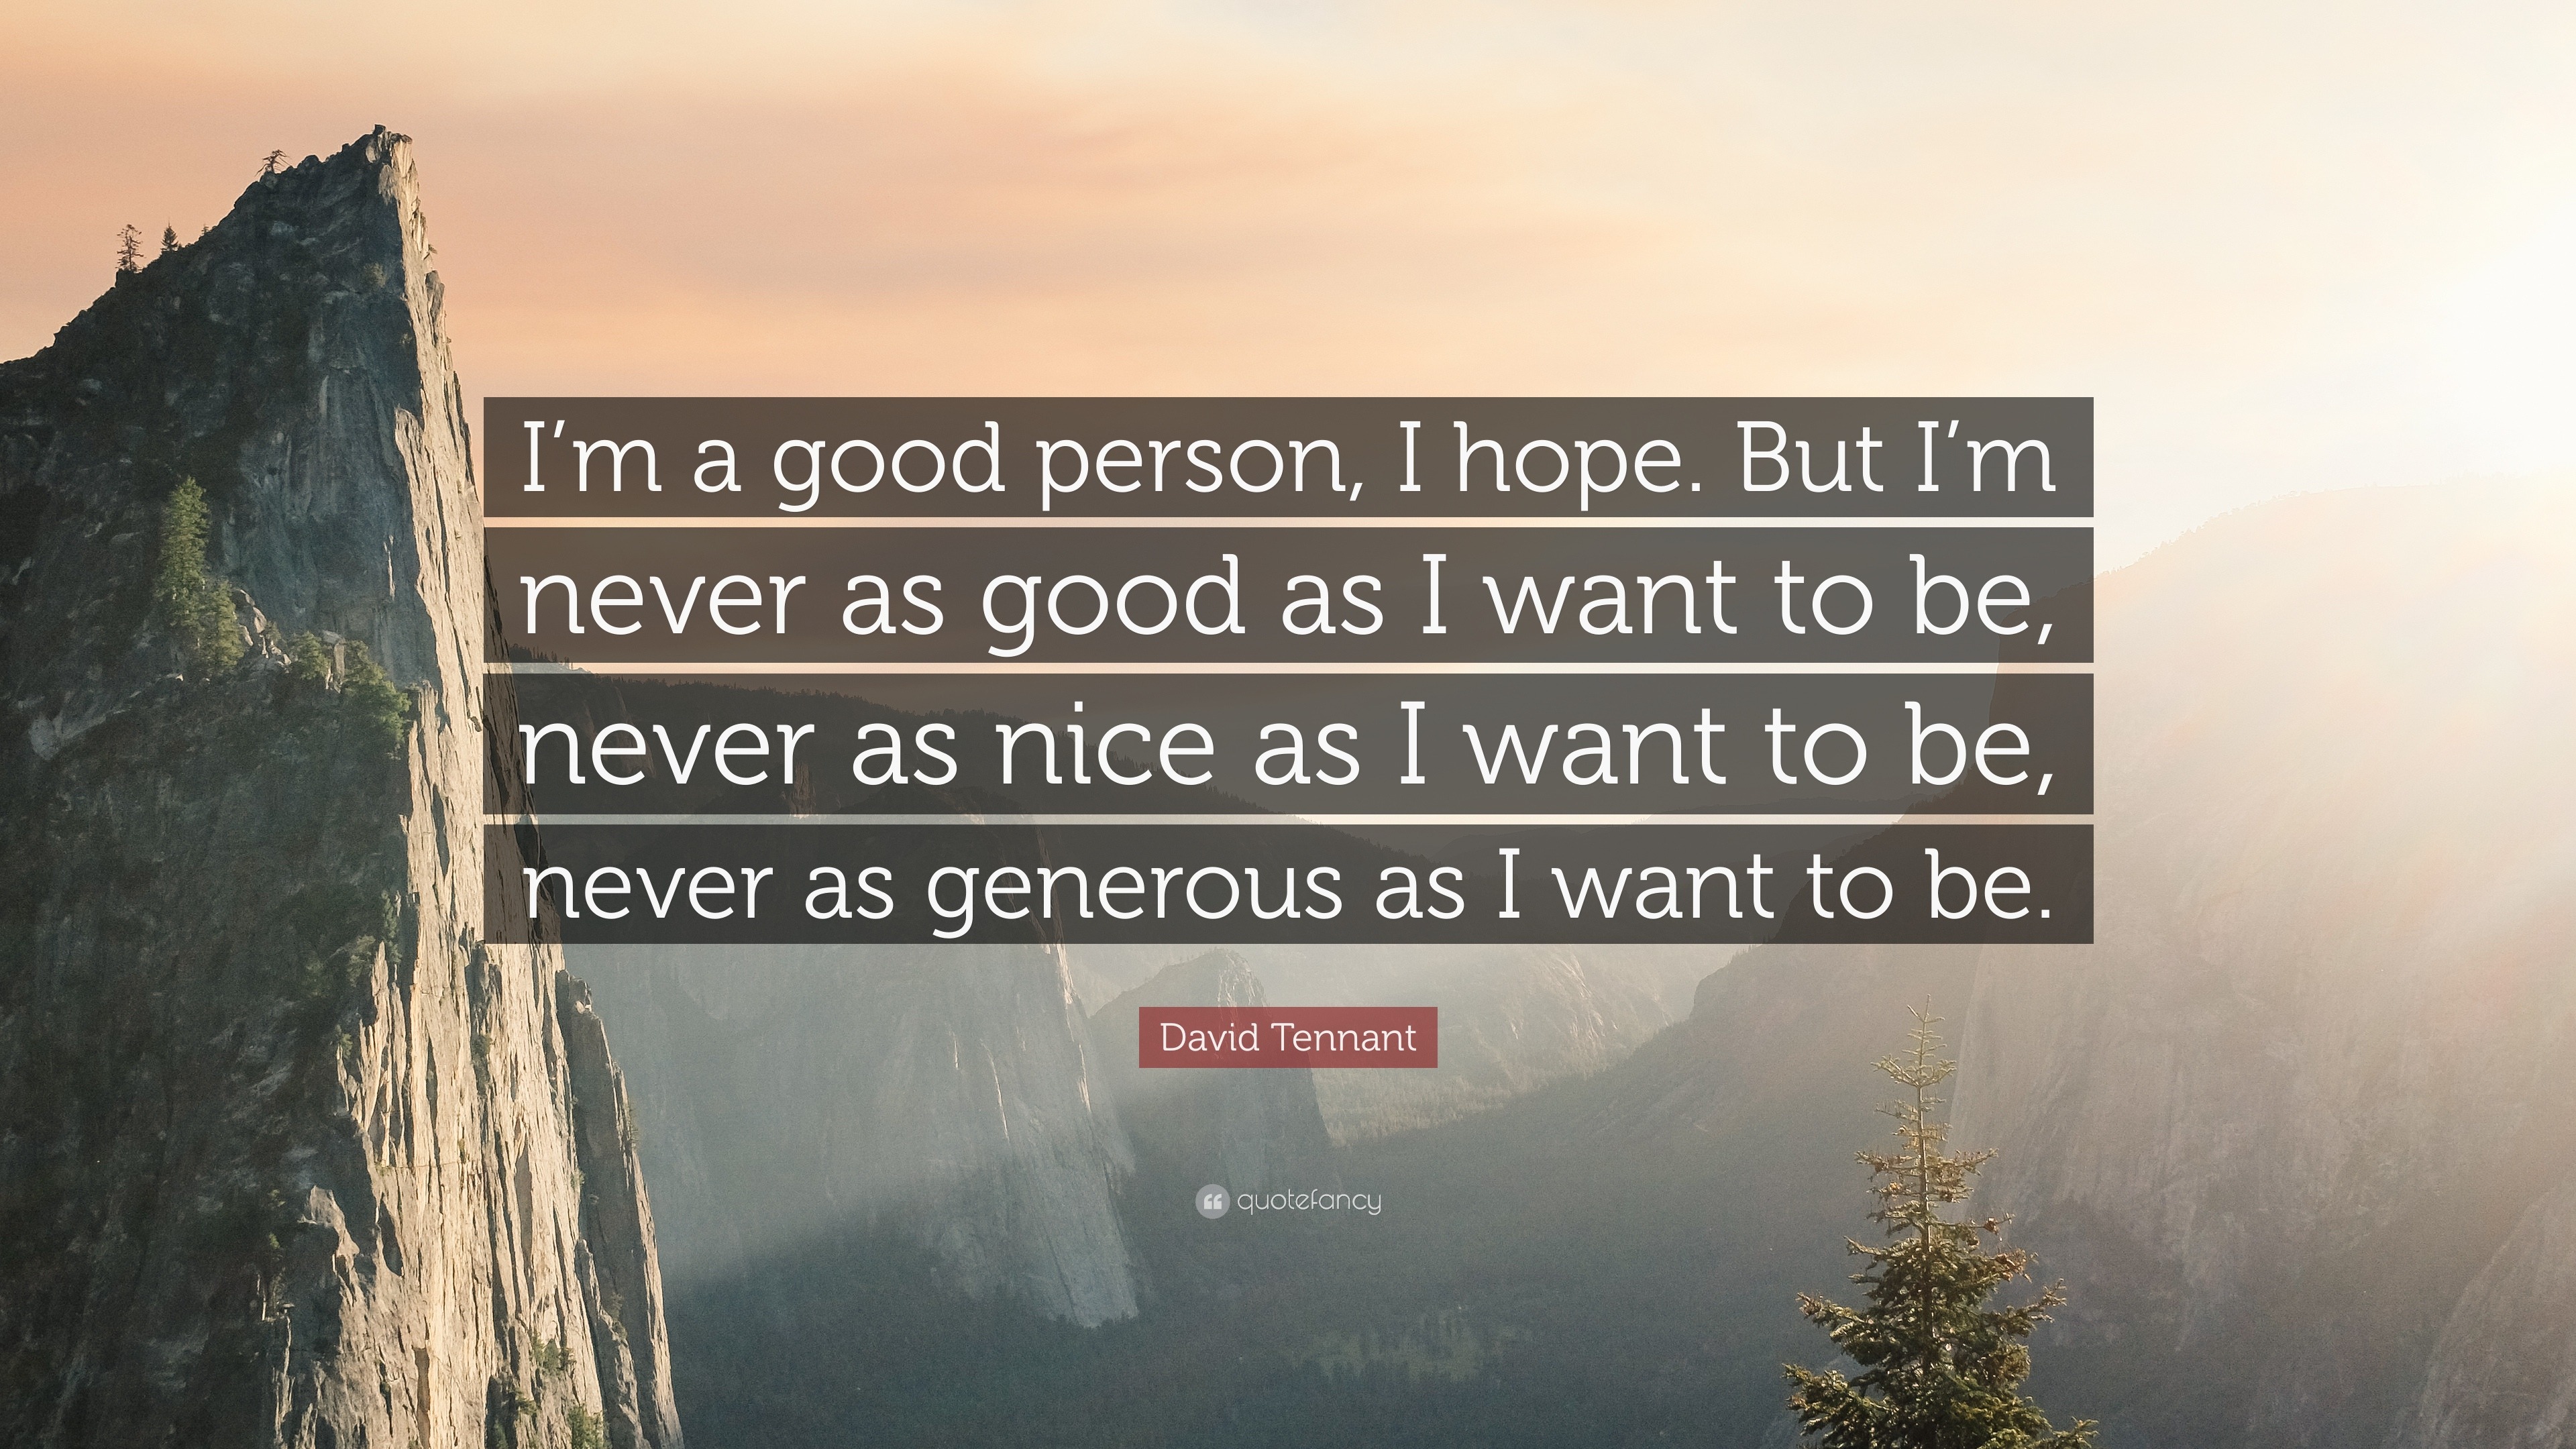 David Tennant Quote: “I'm a good person, I hope. But I'm never as good